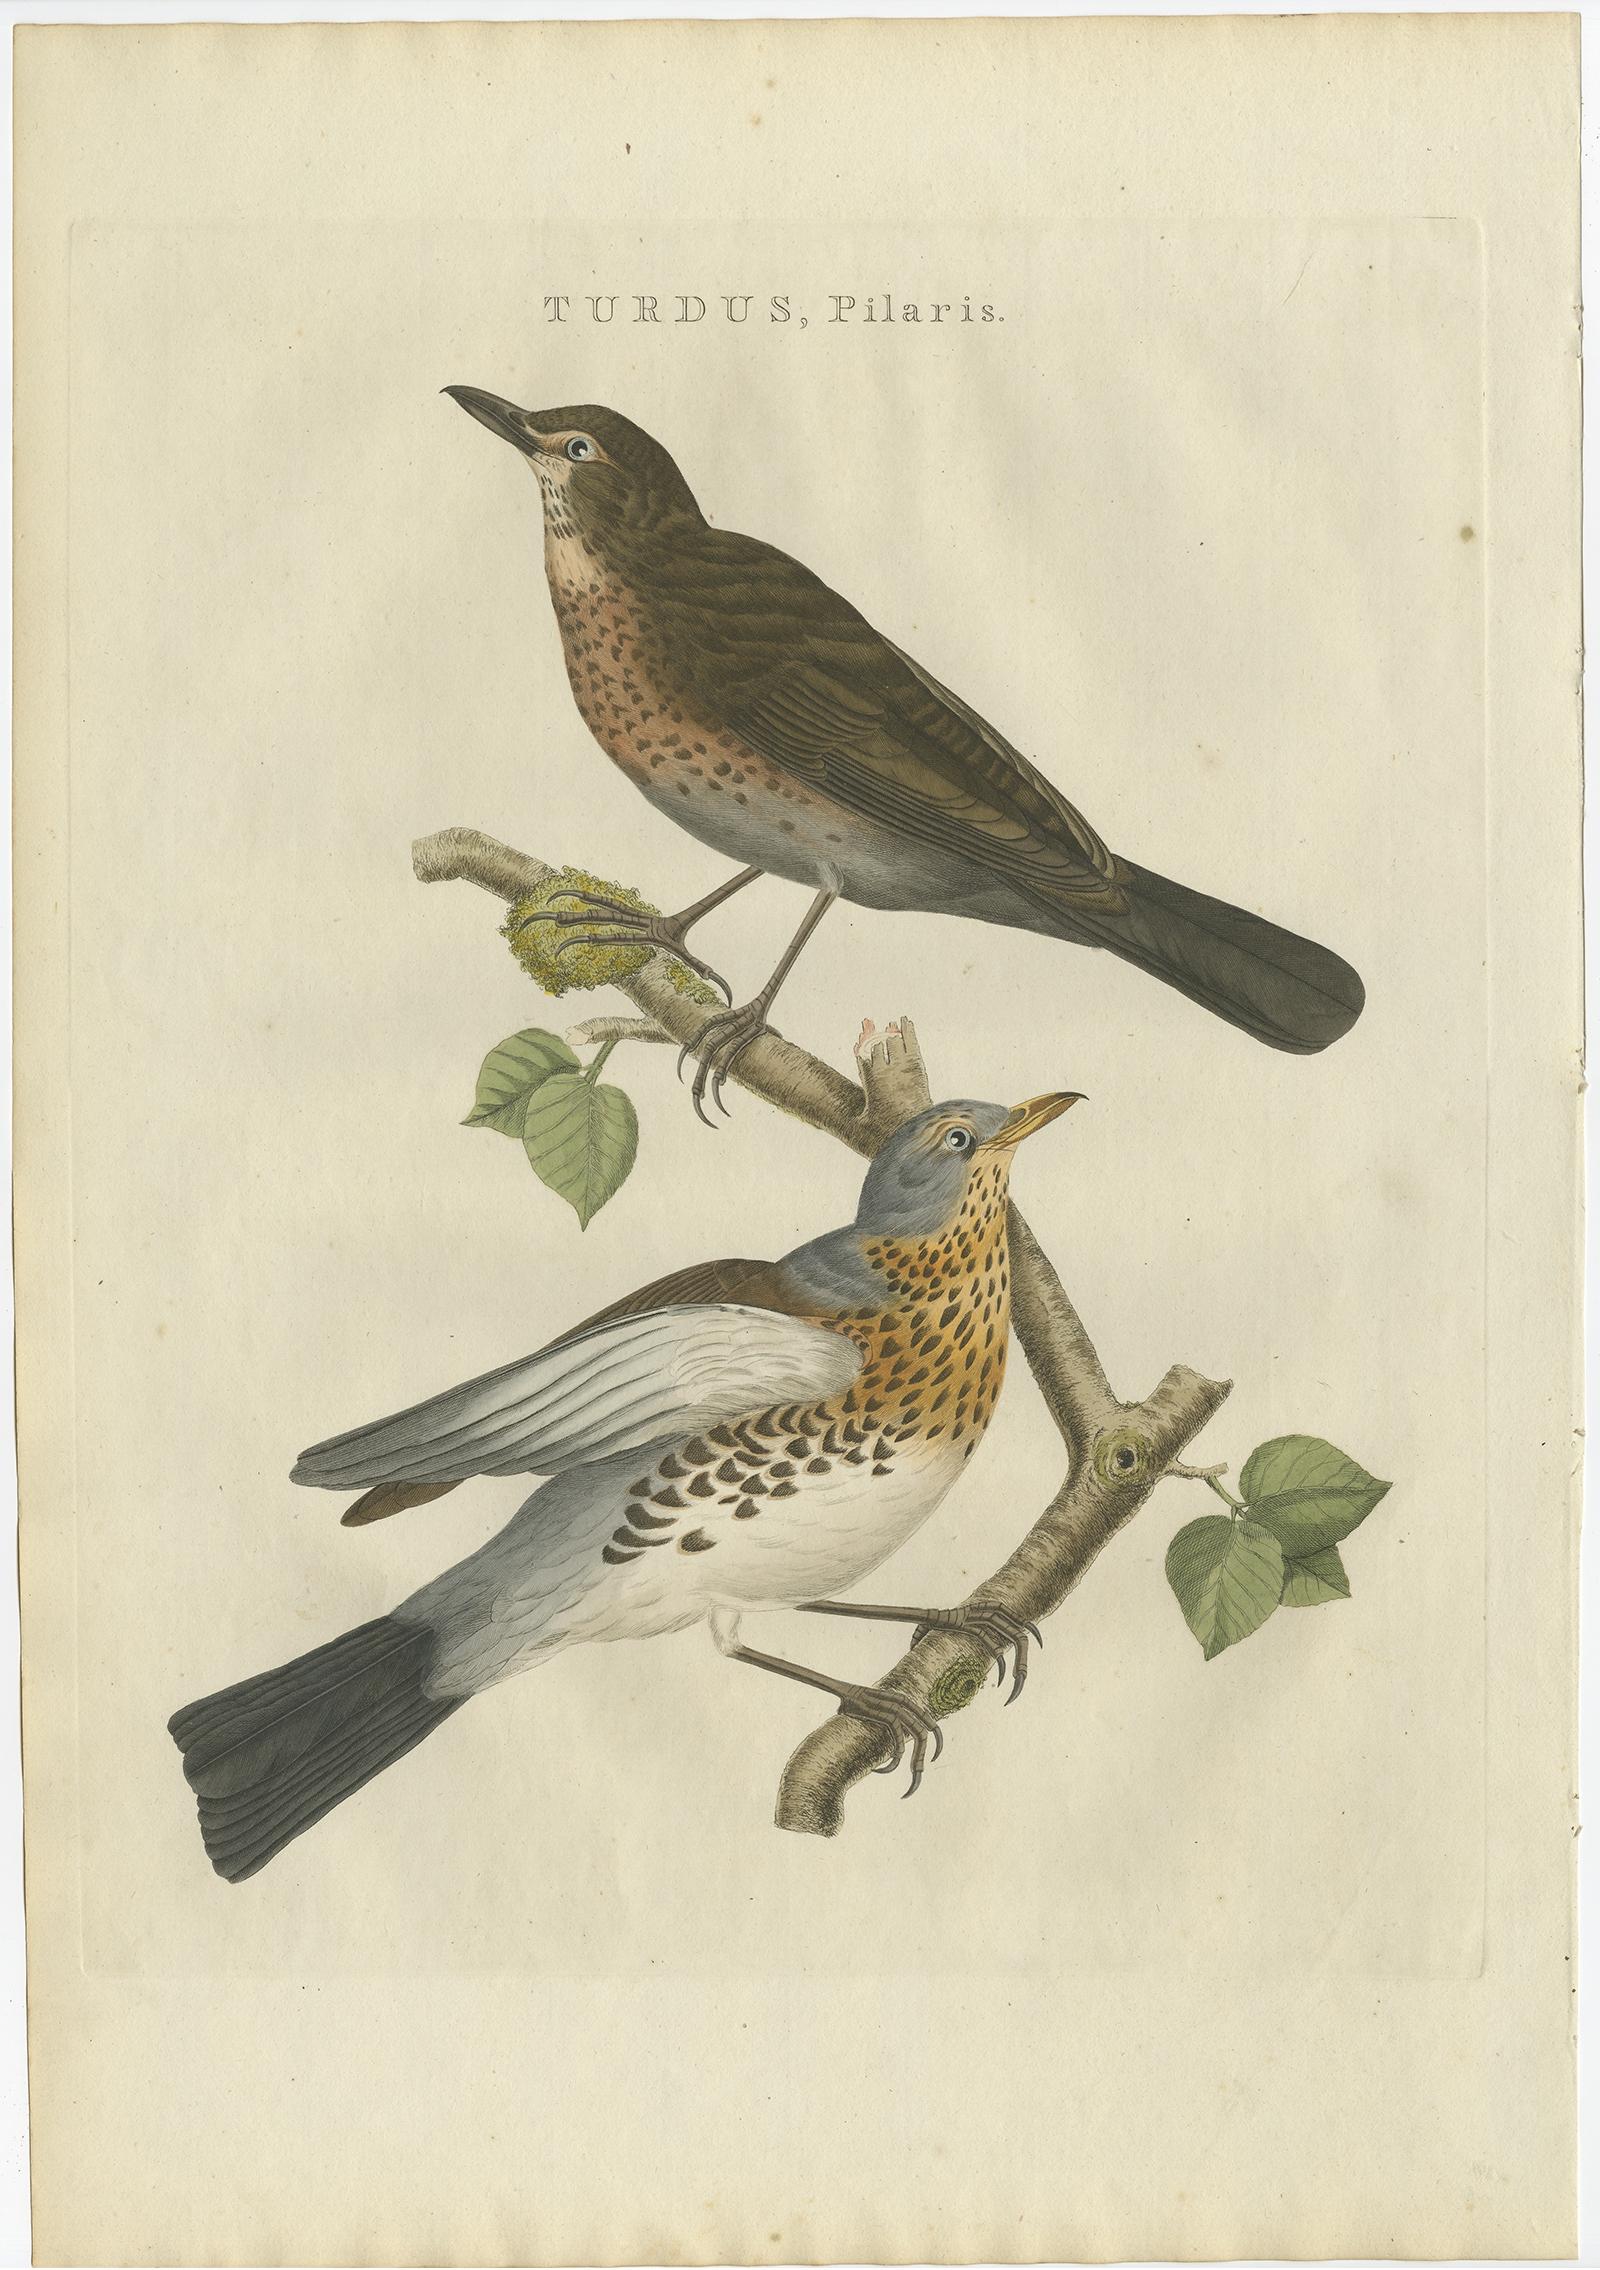 Antique print titled ‘Turdus, Pilaris'. 

This print depicts the fieldfare (Dutch: kramsvogel). The fieldfare (Turdus pilaris) is a member of the thrush family Turdidae. It breeds in woodland and scrub in northern Europe and Asia. It is strongly